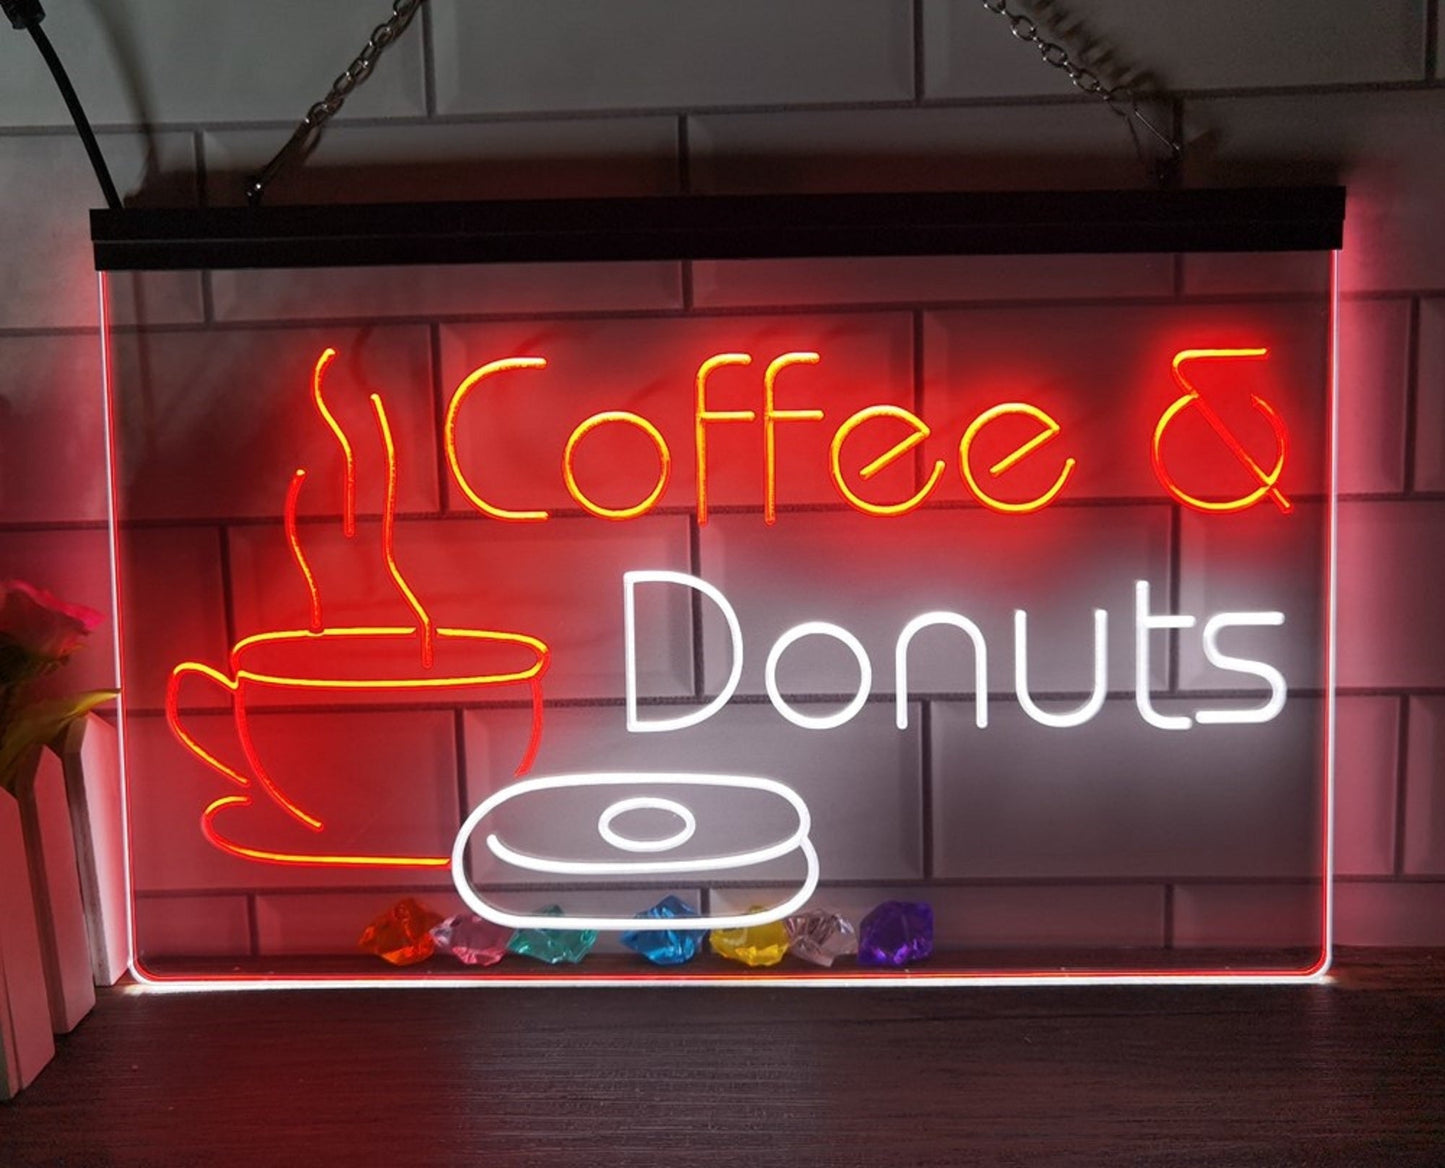 Neon Sign Dual Color Coffee & Donuts For Coffee Shop Wall Desktop Decor